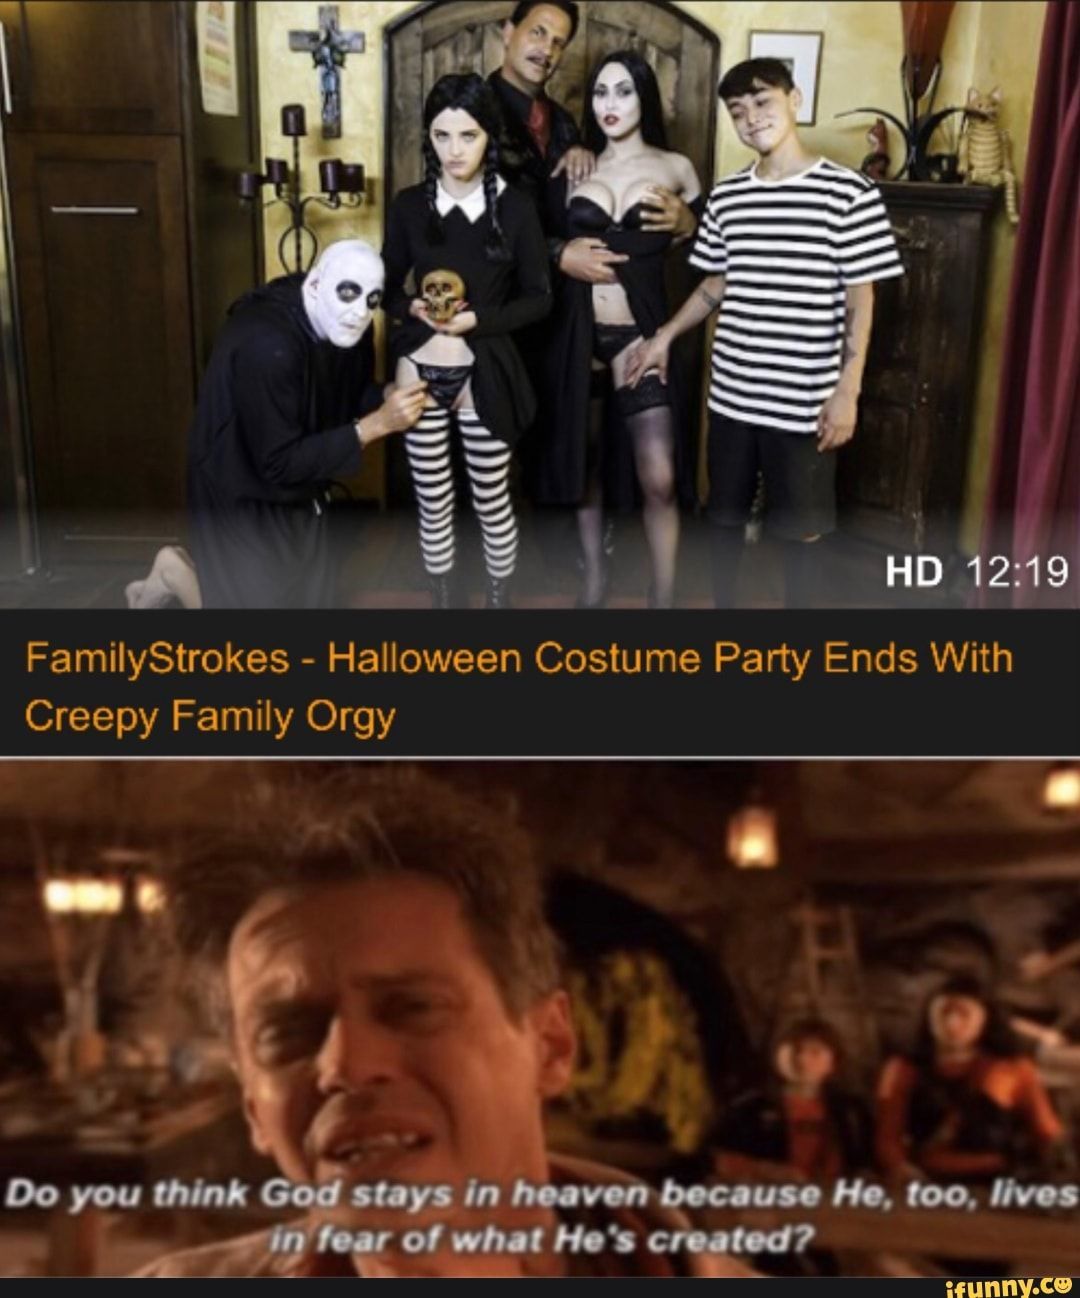 Number S. reccomend familystrokes party ends with creepy